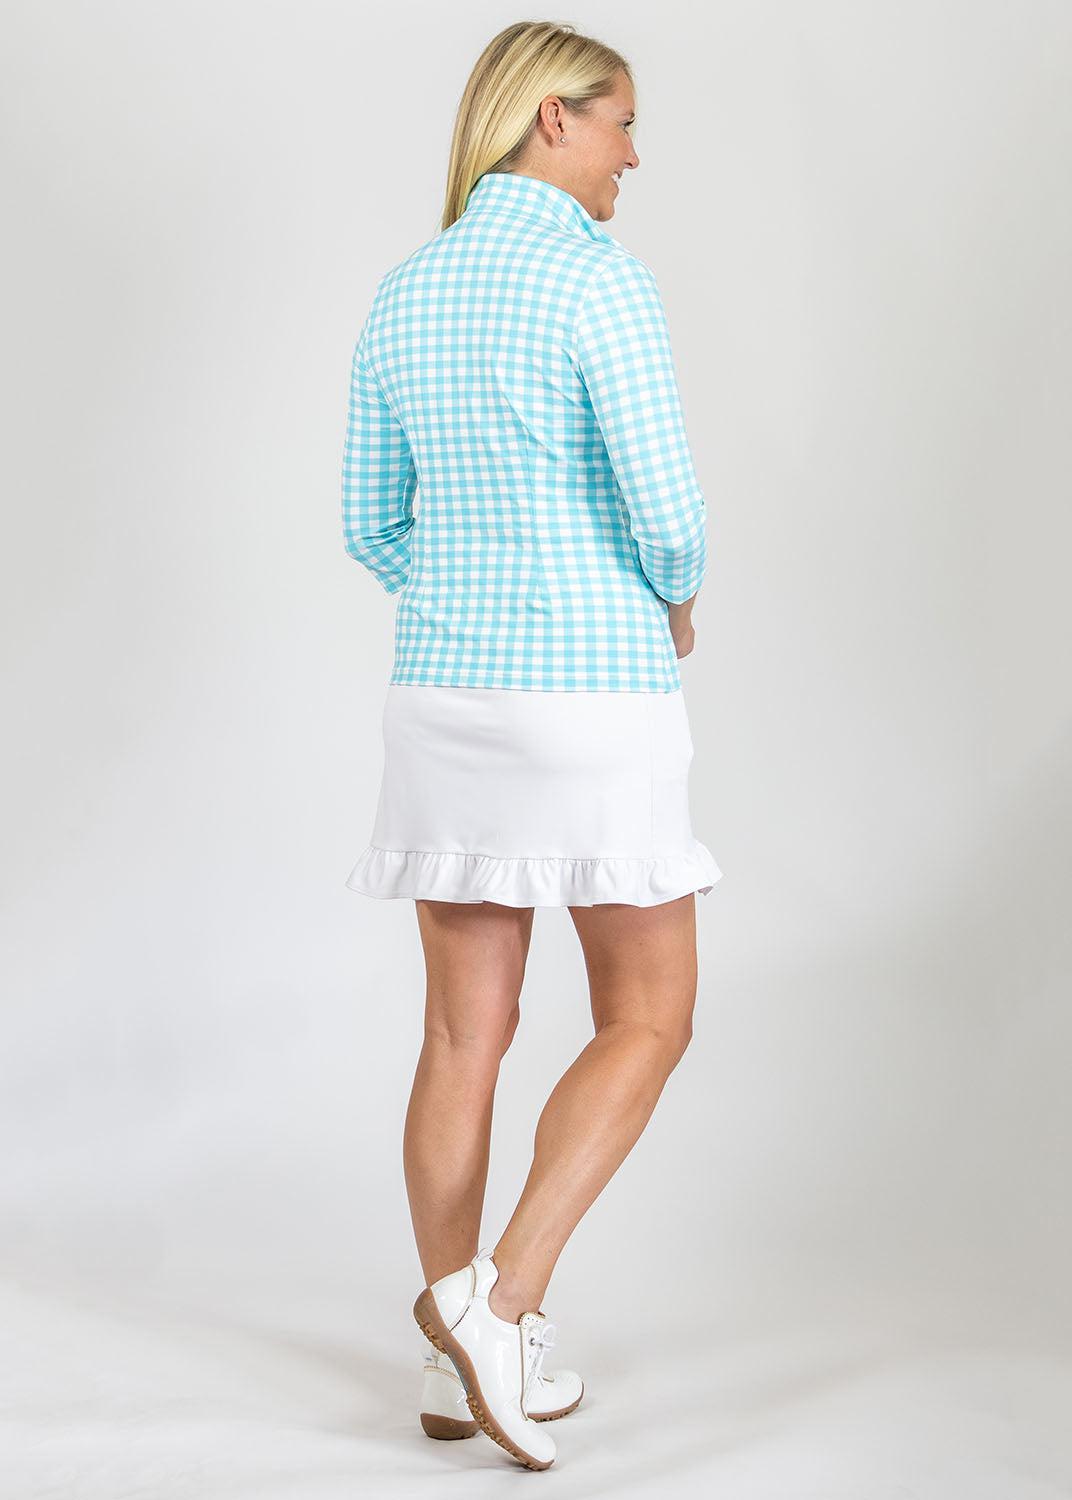 4 Sleeve Top in a Gingham Print 2